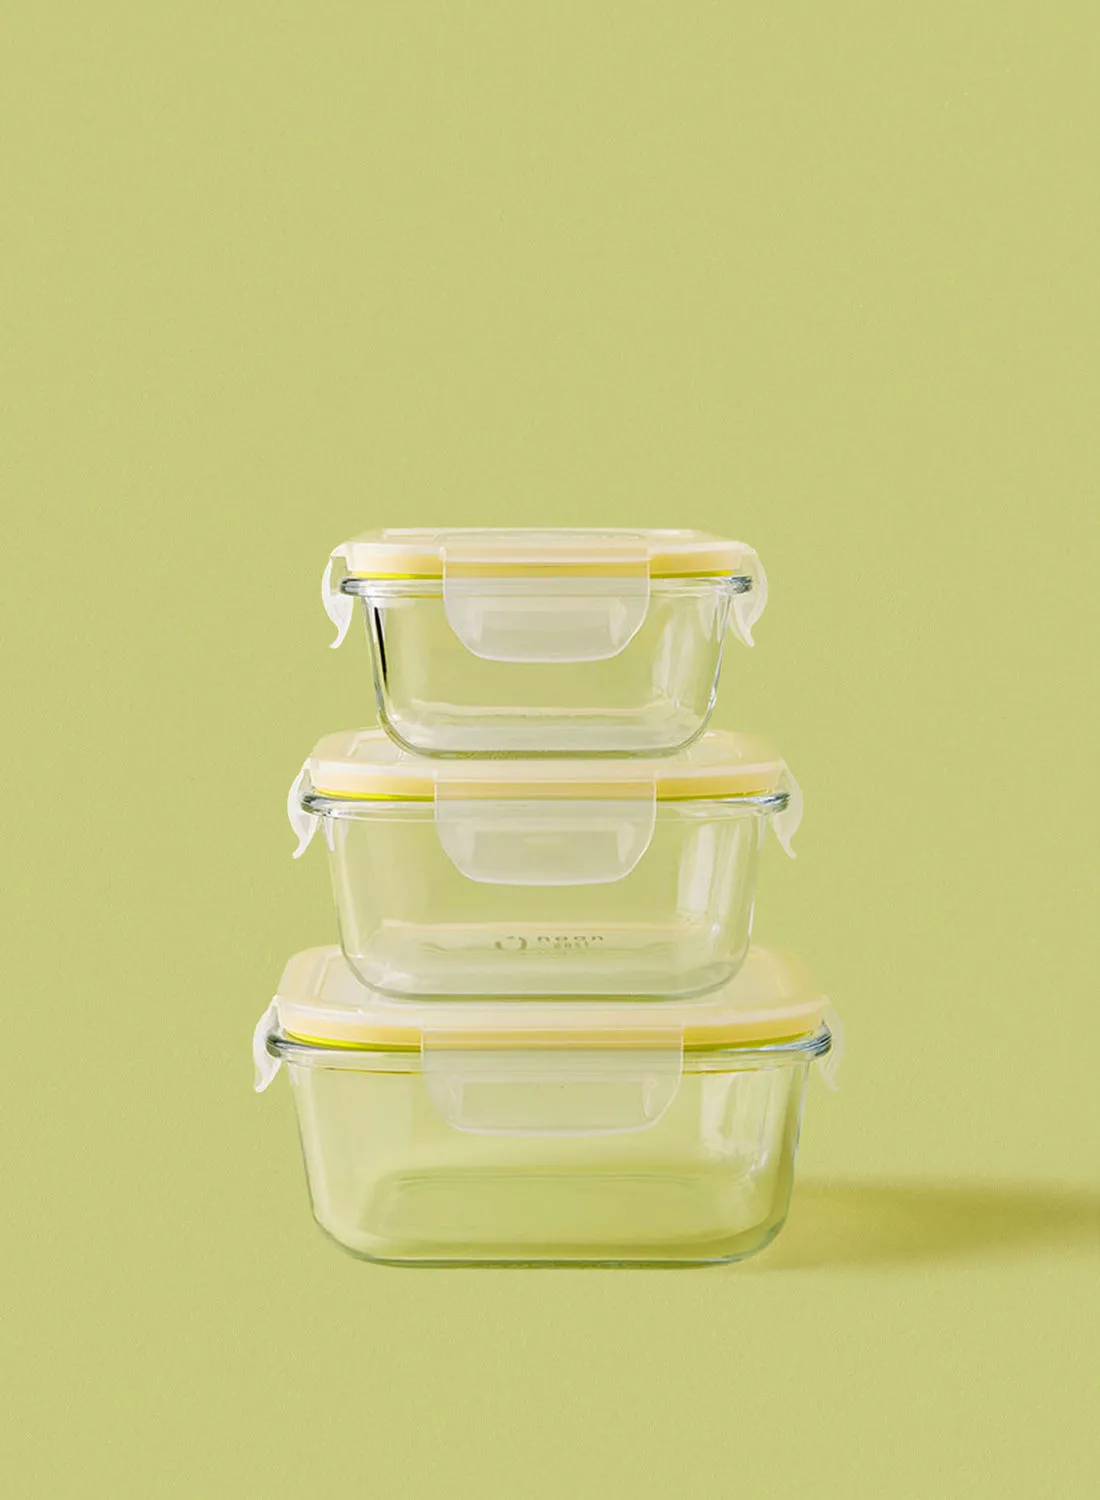 noon east 3 Piece Borosilicate Glass Food Container Set - Airtight Lids - Lunch Box - Sqaure - Food Storage Box - Storage Boxes - Kitchen Cabinet Organizers - Glass Food Container - Yellow